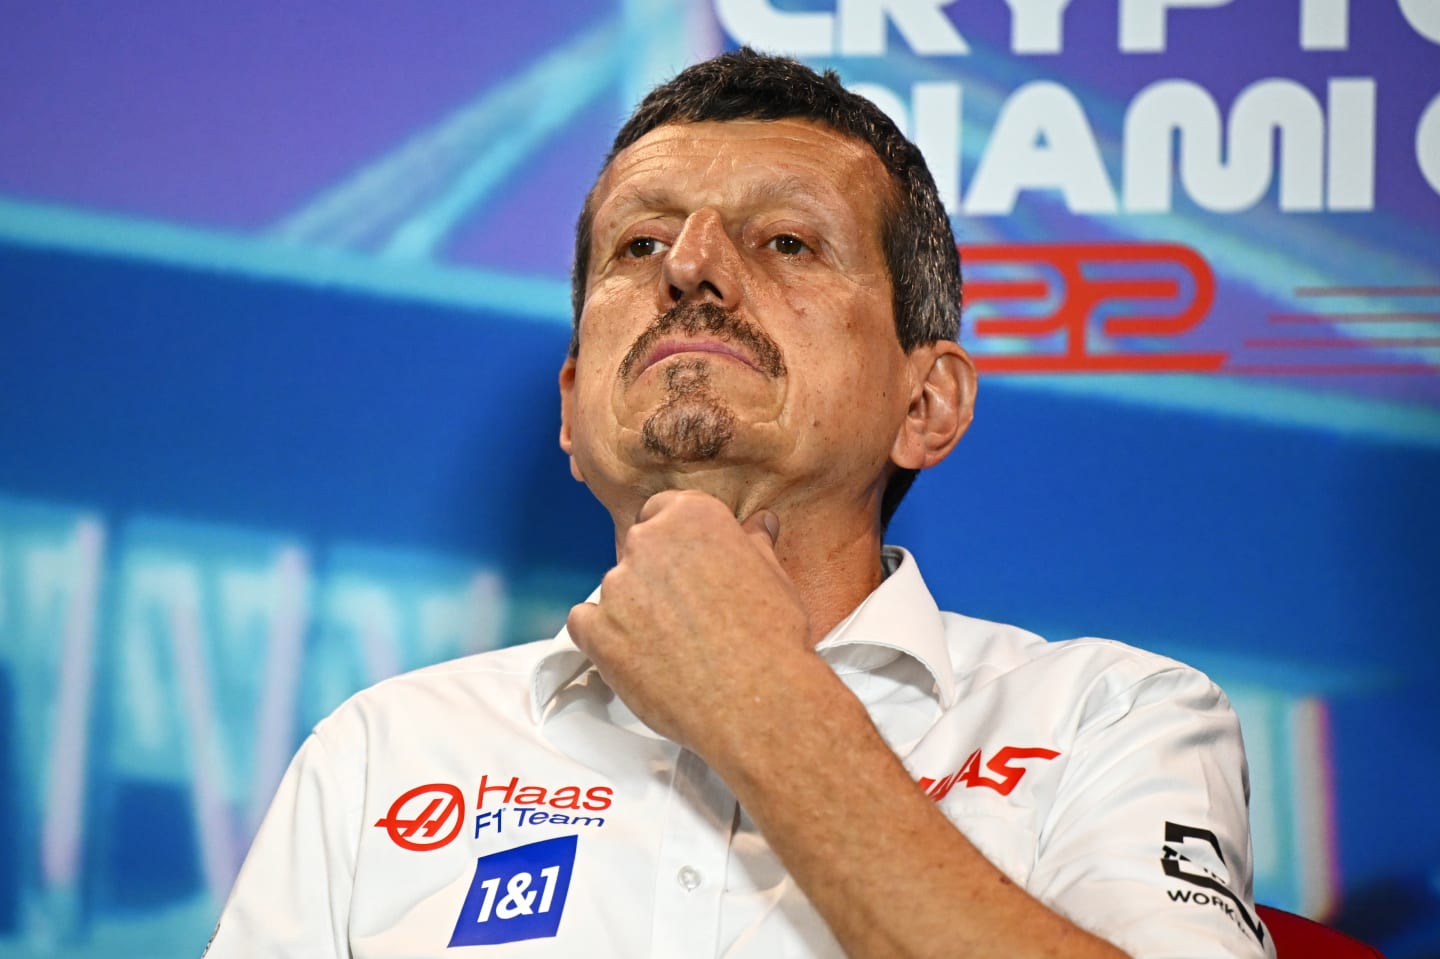 MIAMI, FLORIDA - MAY 07: Haas F1 Team Principal Guenther Steiner talks in the Team Principals Press Conference prior to final practice ahead of the F1 Grand Prix of Miami at the Miami International Autodrome on May 07, 2022 in Miami, Florida. (Photo by Clive Mason/Getty Images)